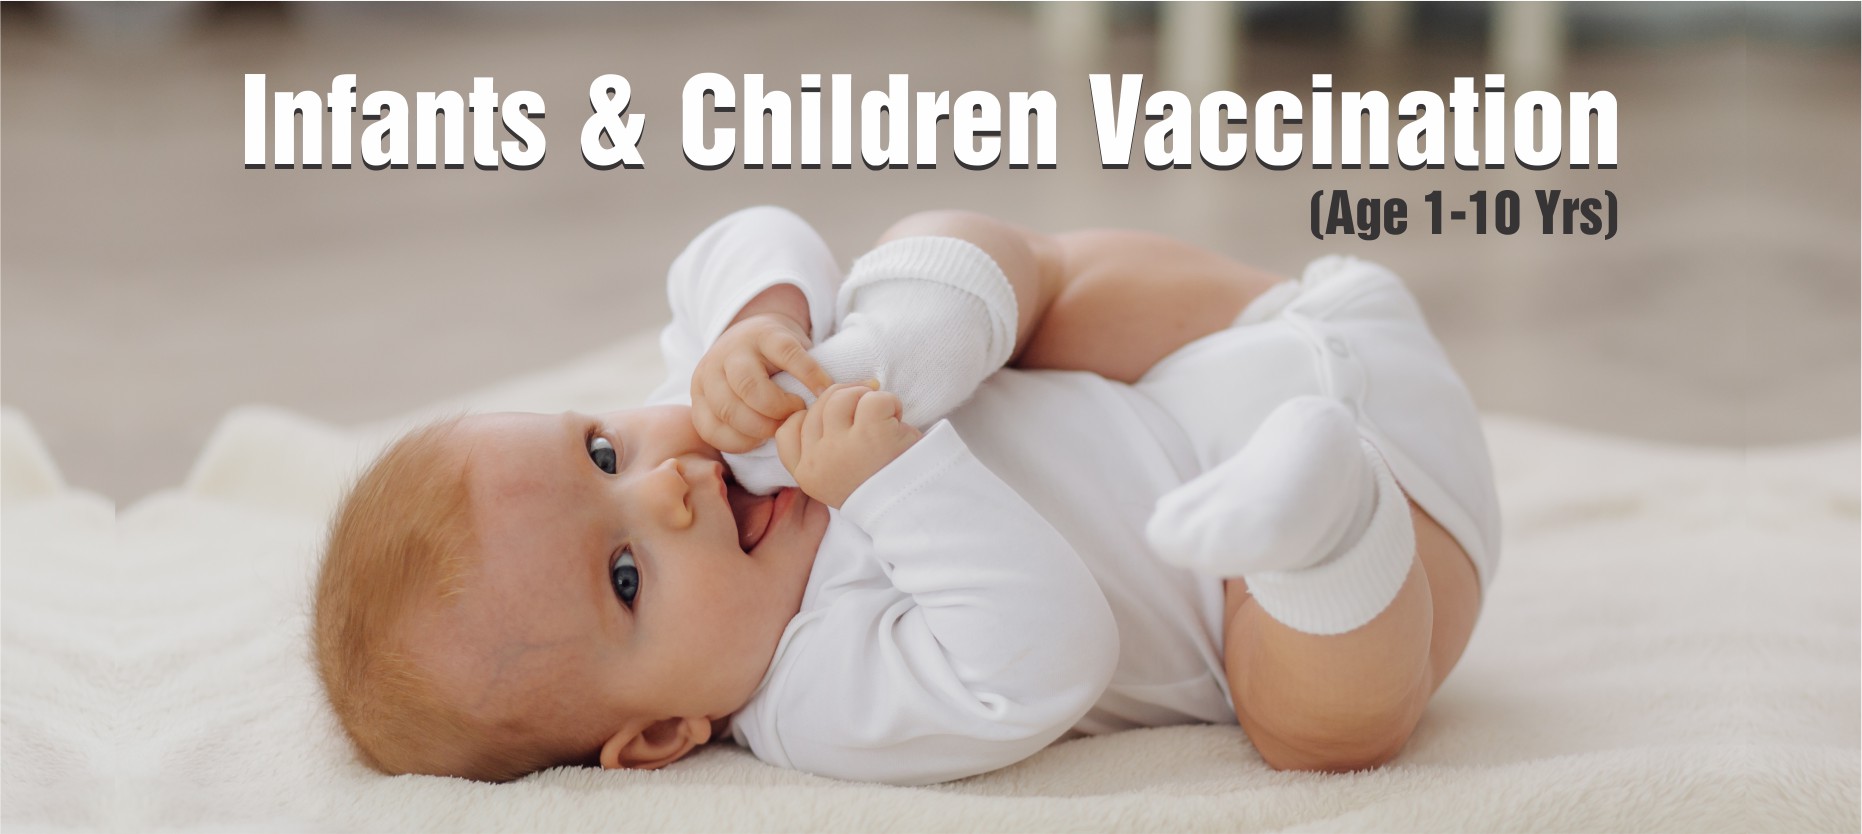 Vaccinations for Infants & Children, Age 0-10 Years